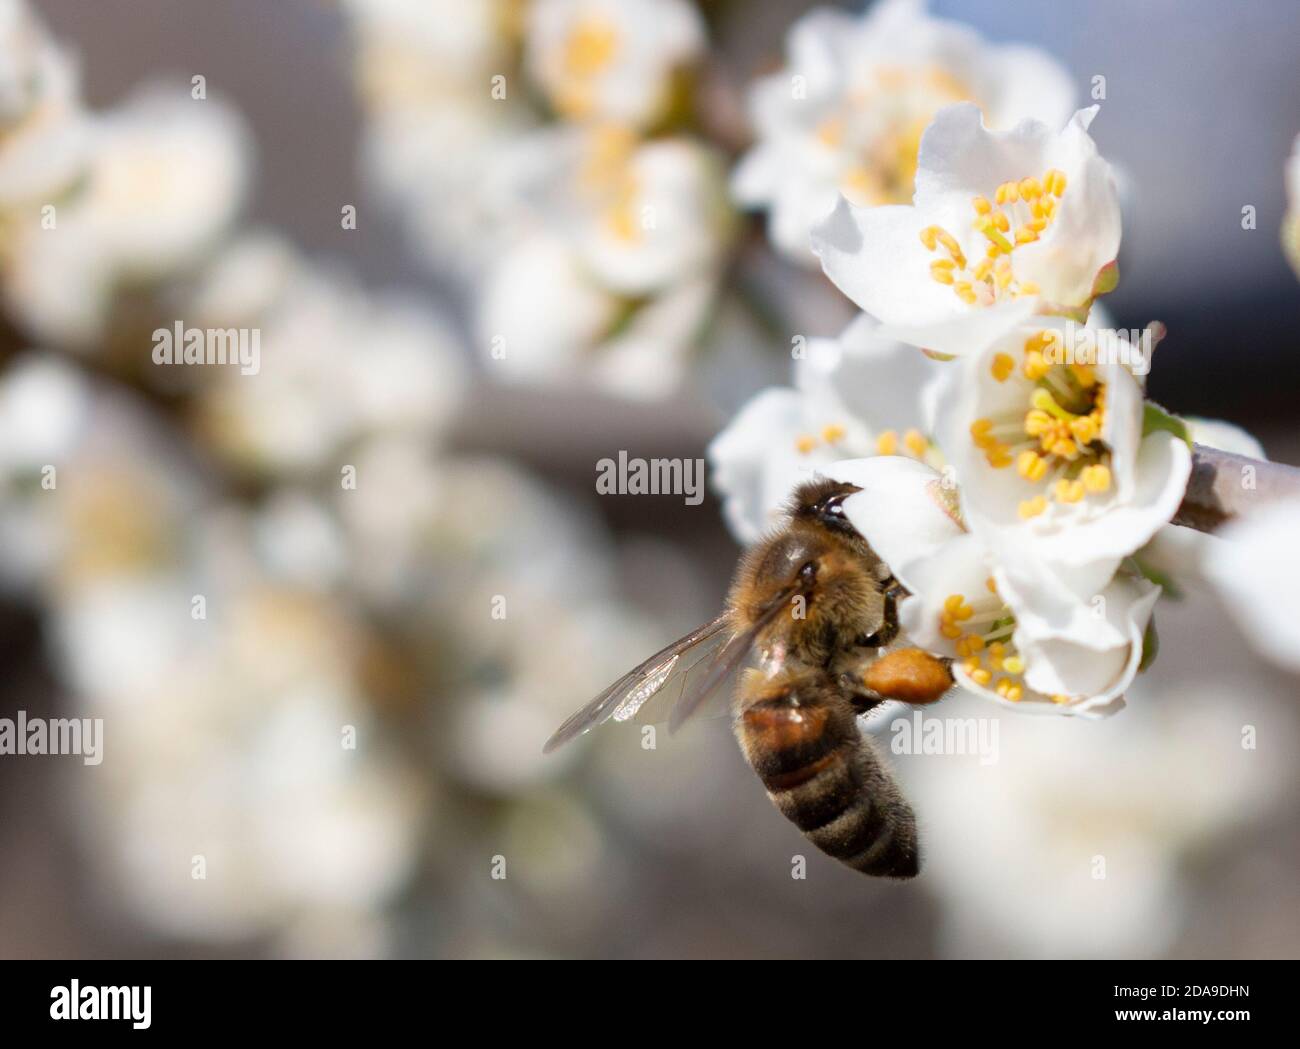 Beekeeping, close-up bees, pollination of fruits and honey collection. Stock Photo